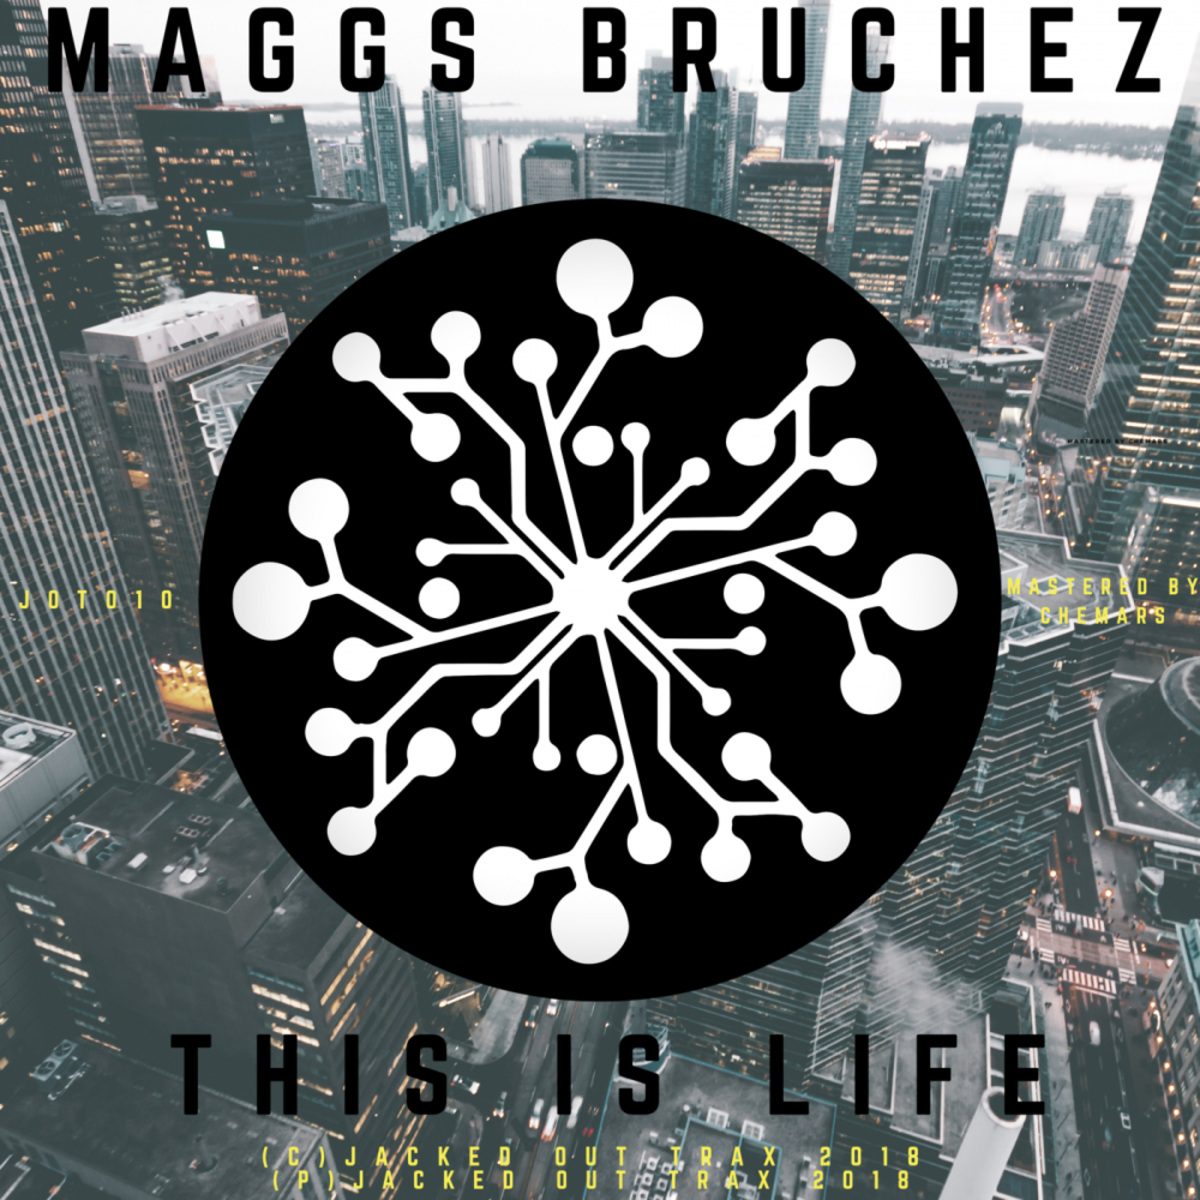 Maggs Bruchez - This Is The Life / Jacked Out Trax